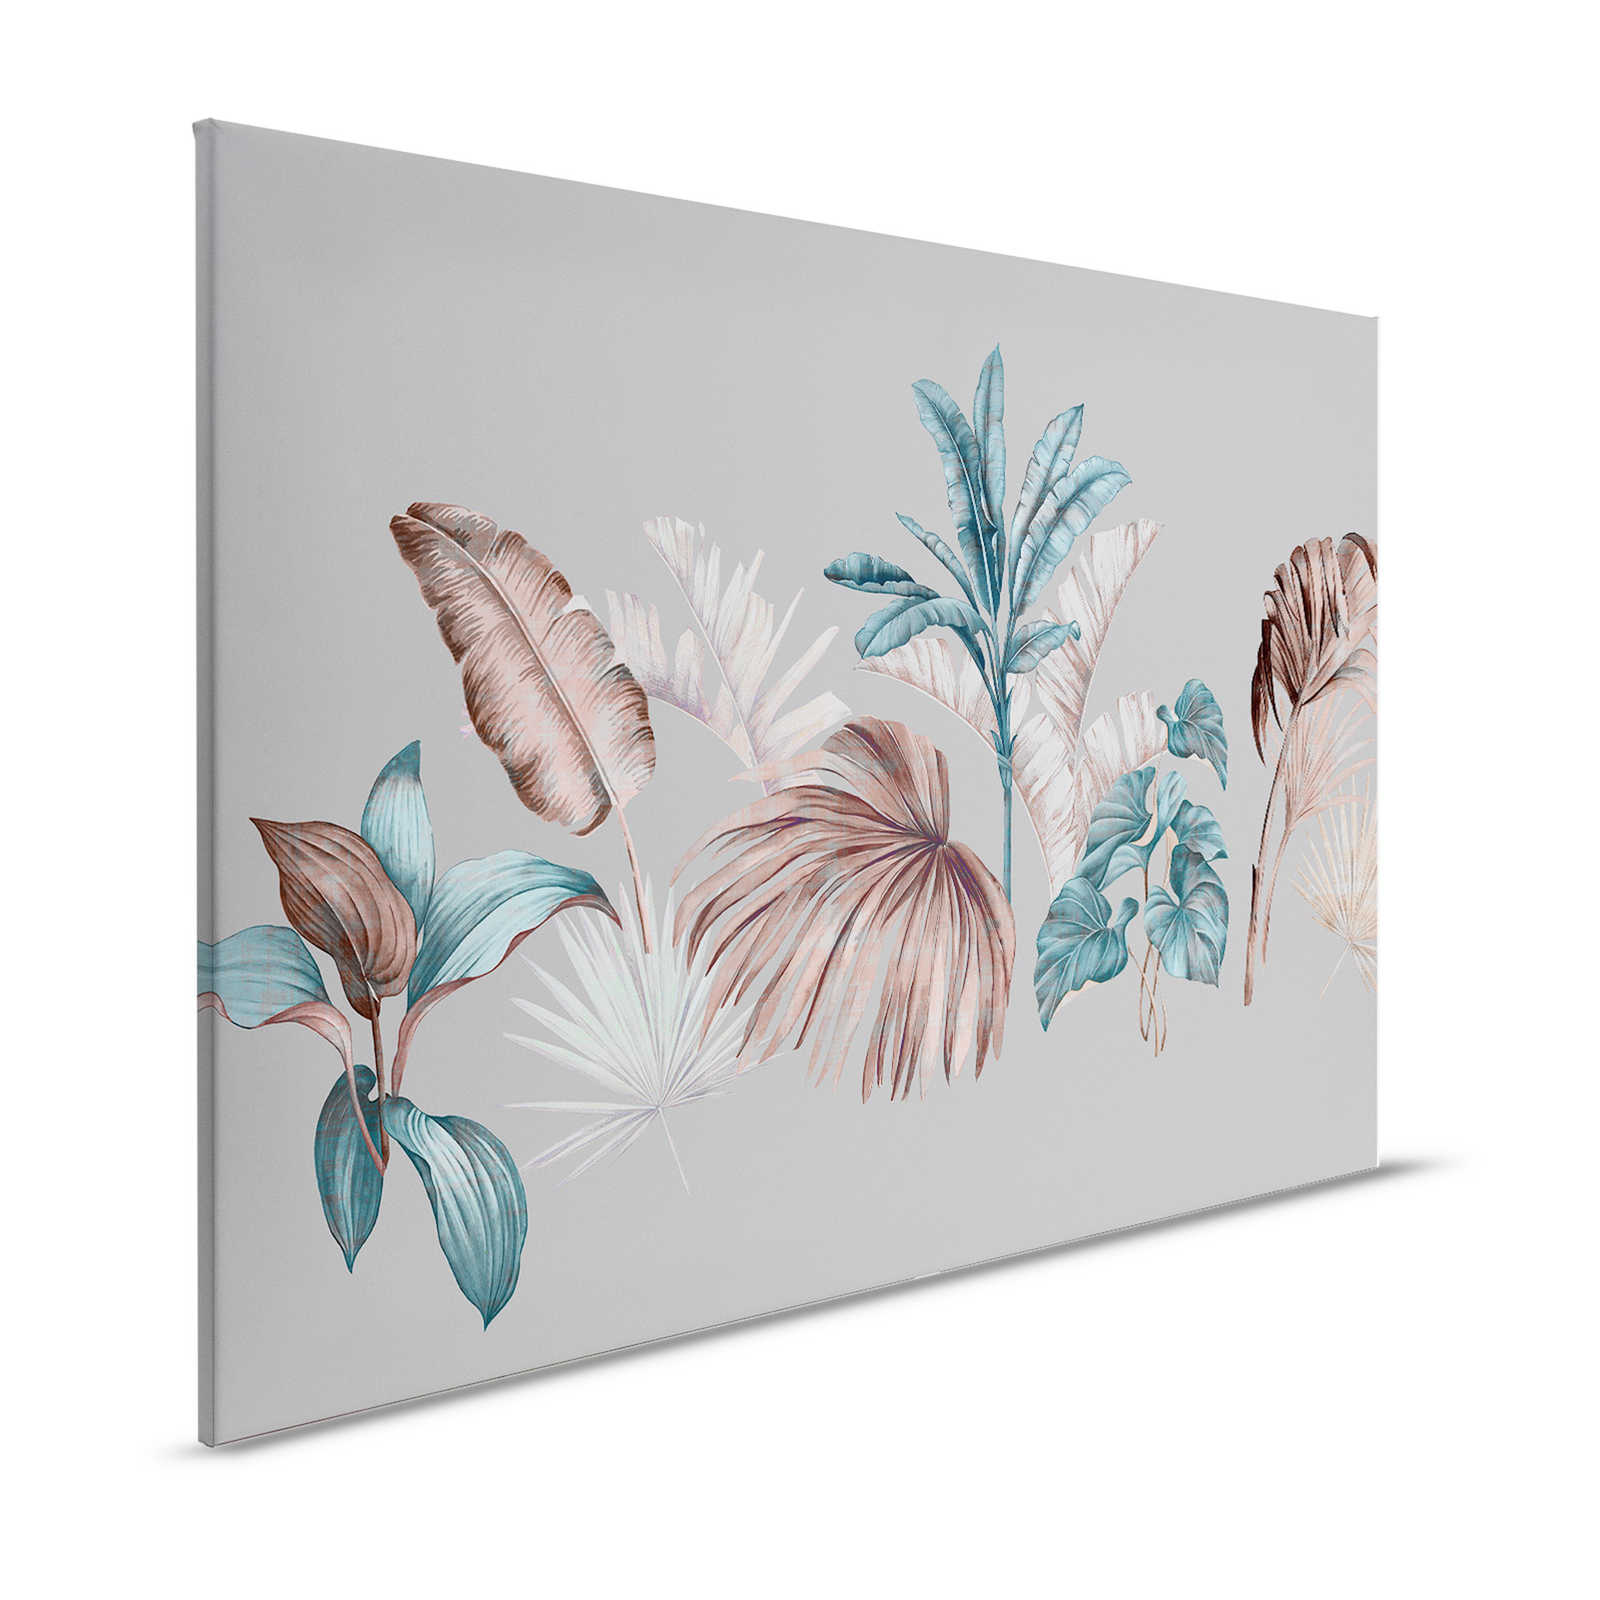 Brasilia 1 - Grey Canvas Painting Tropical Leaves in Petrol & Copper - 1.20 m x 0.80 m
